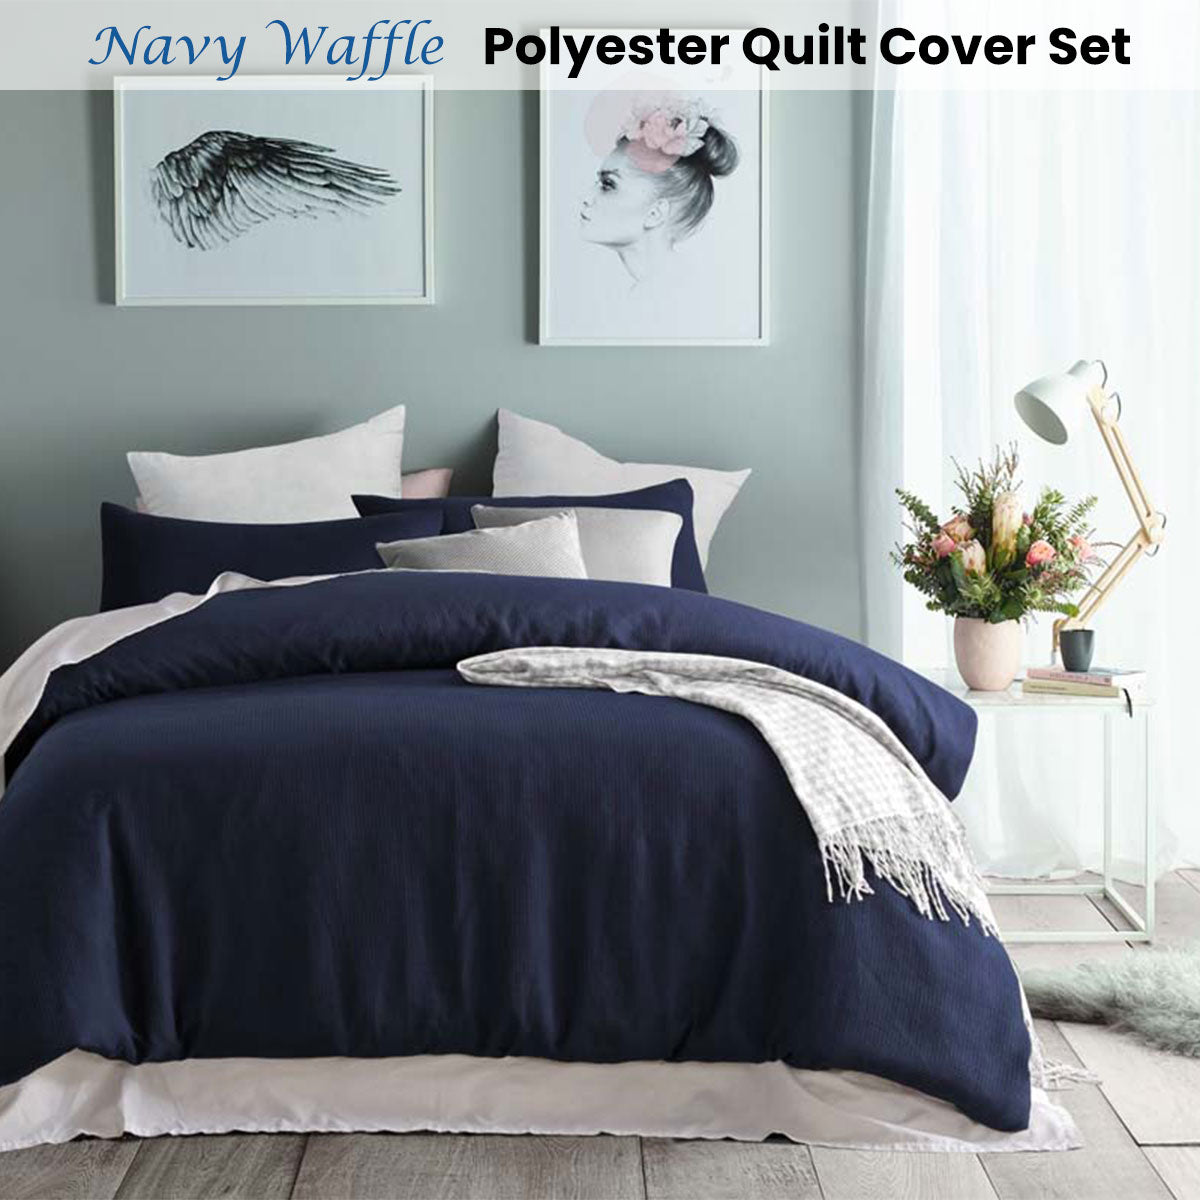 NAVY WAFFLE QUILT COVER SET - SINGLE